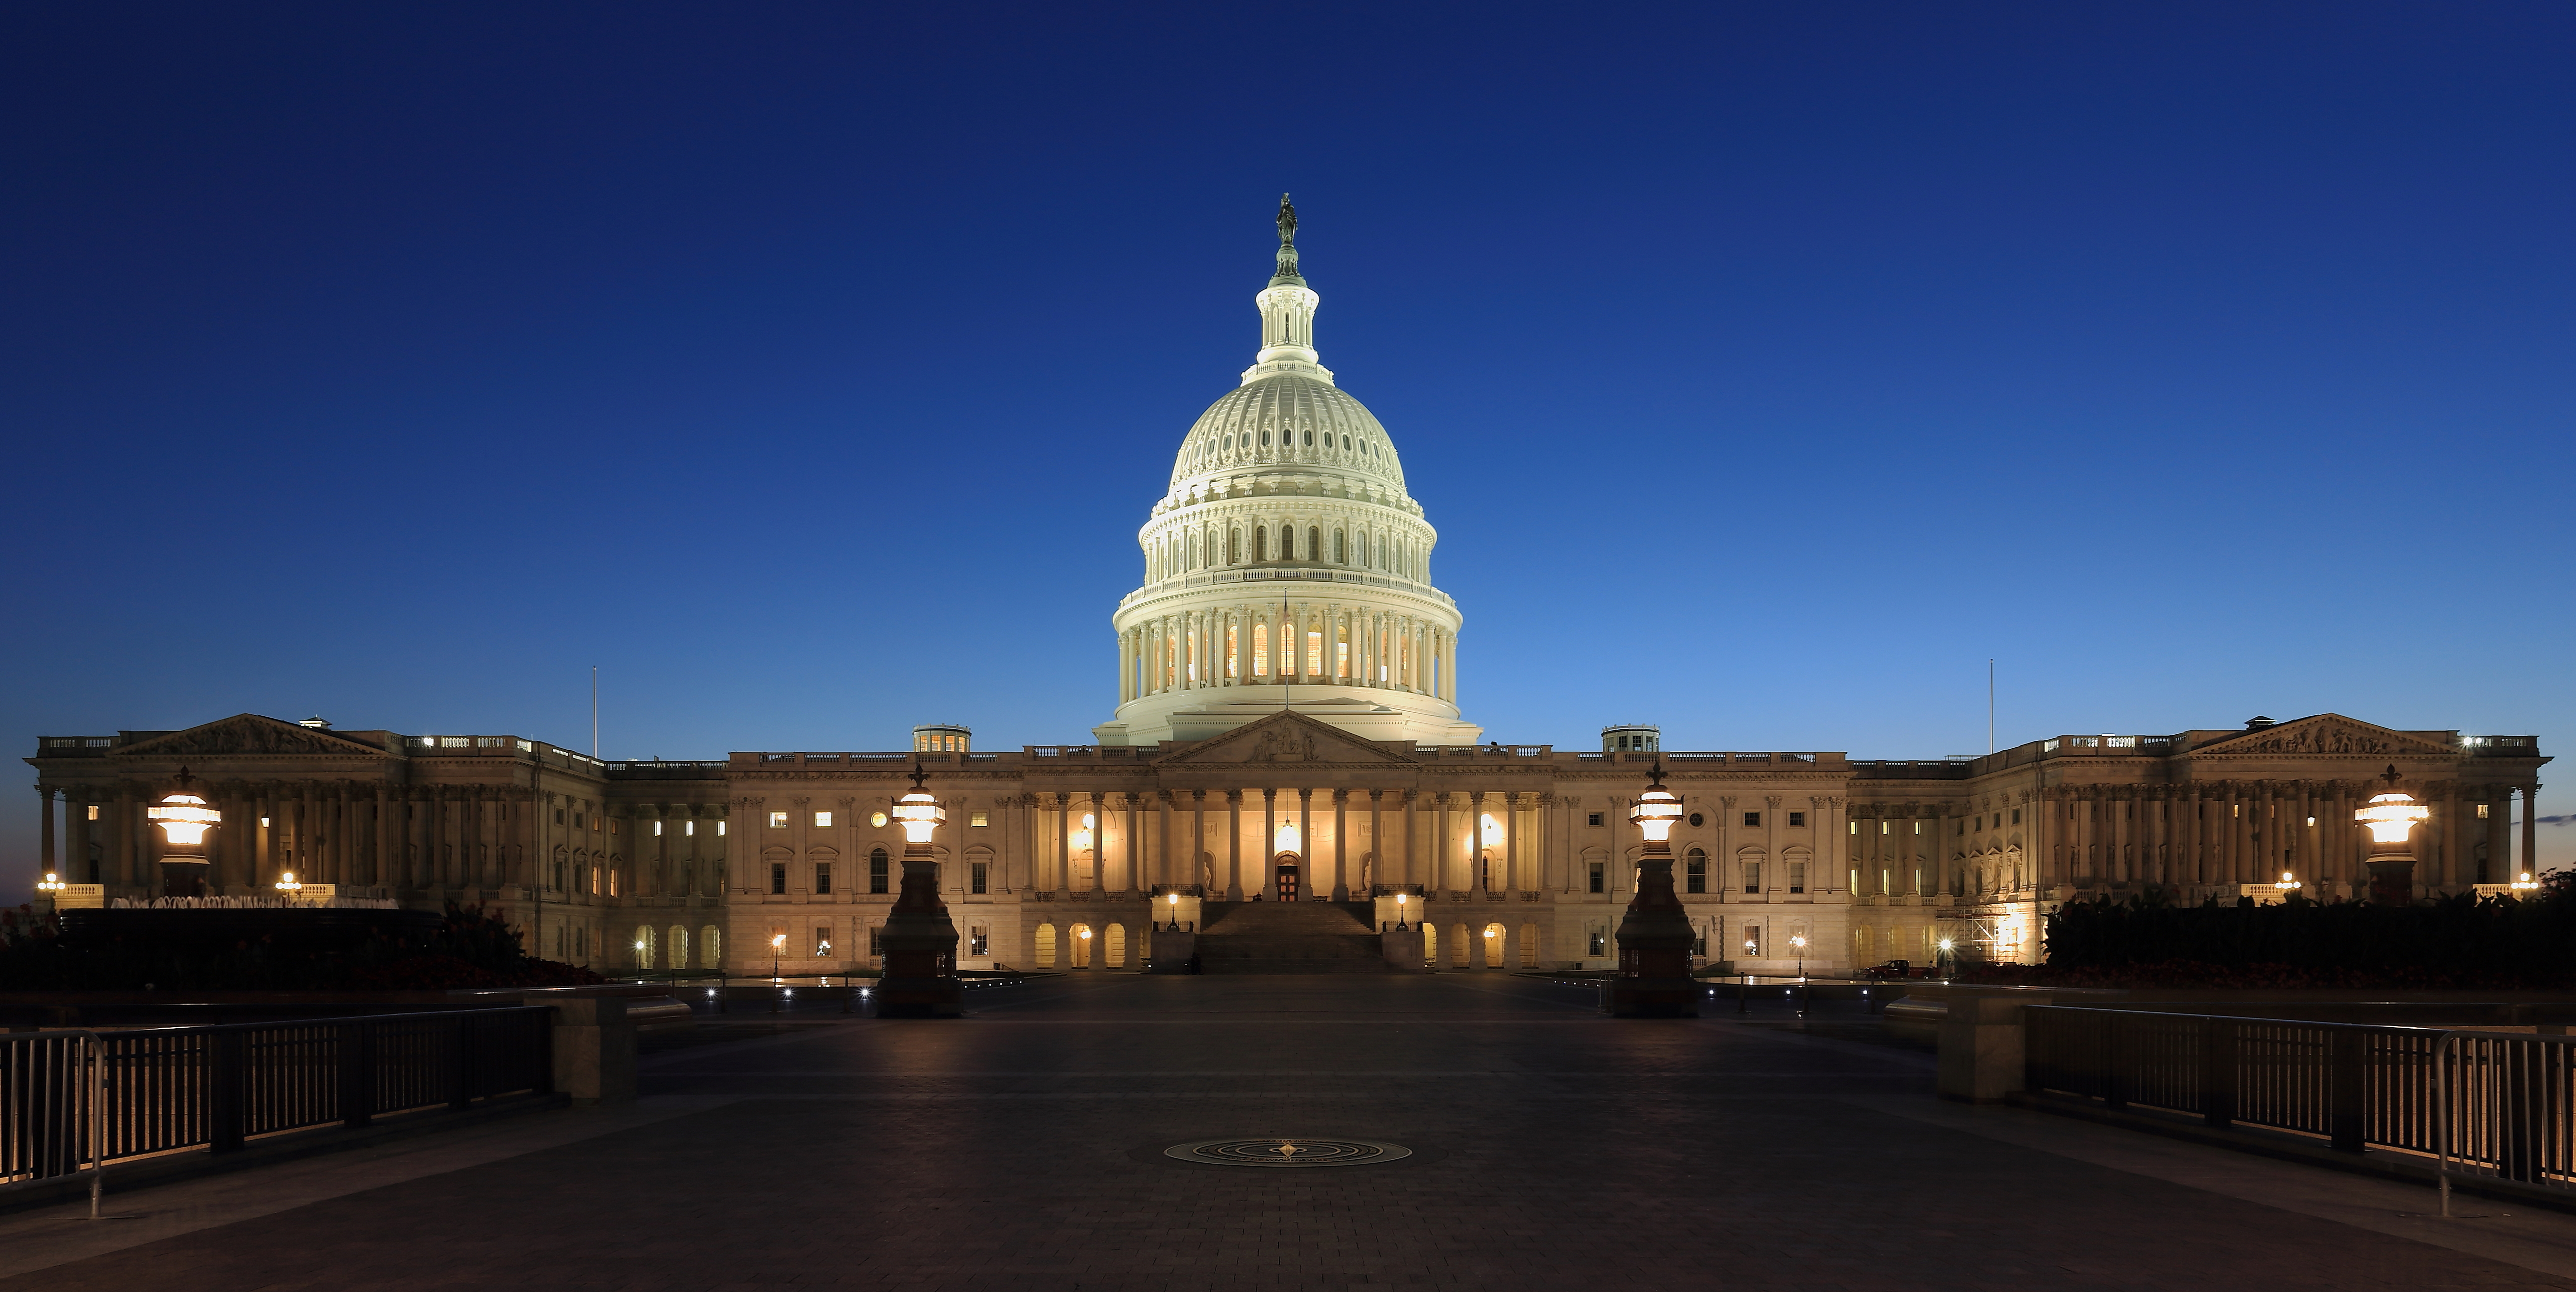 Photograph of the U.S. Capitol Building at dusk